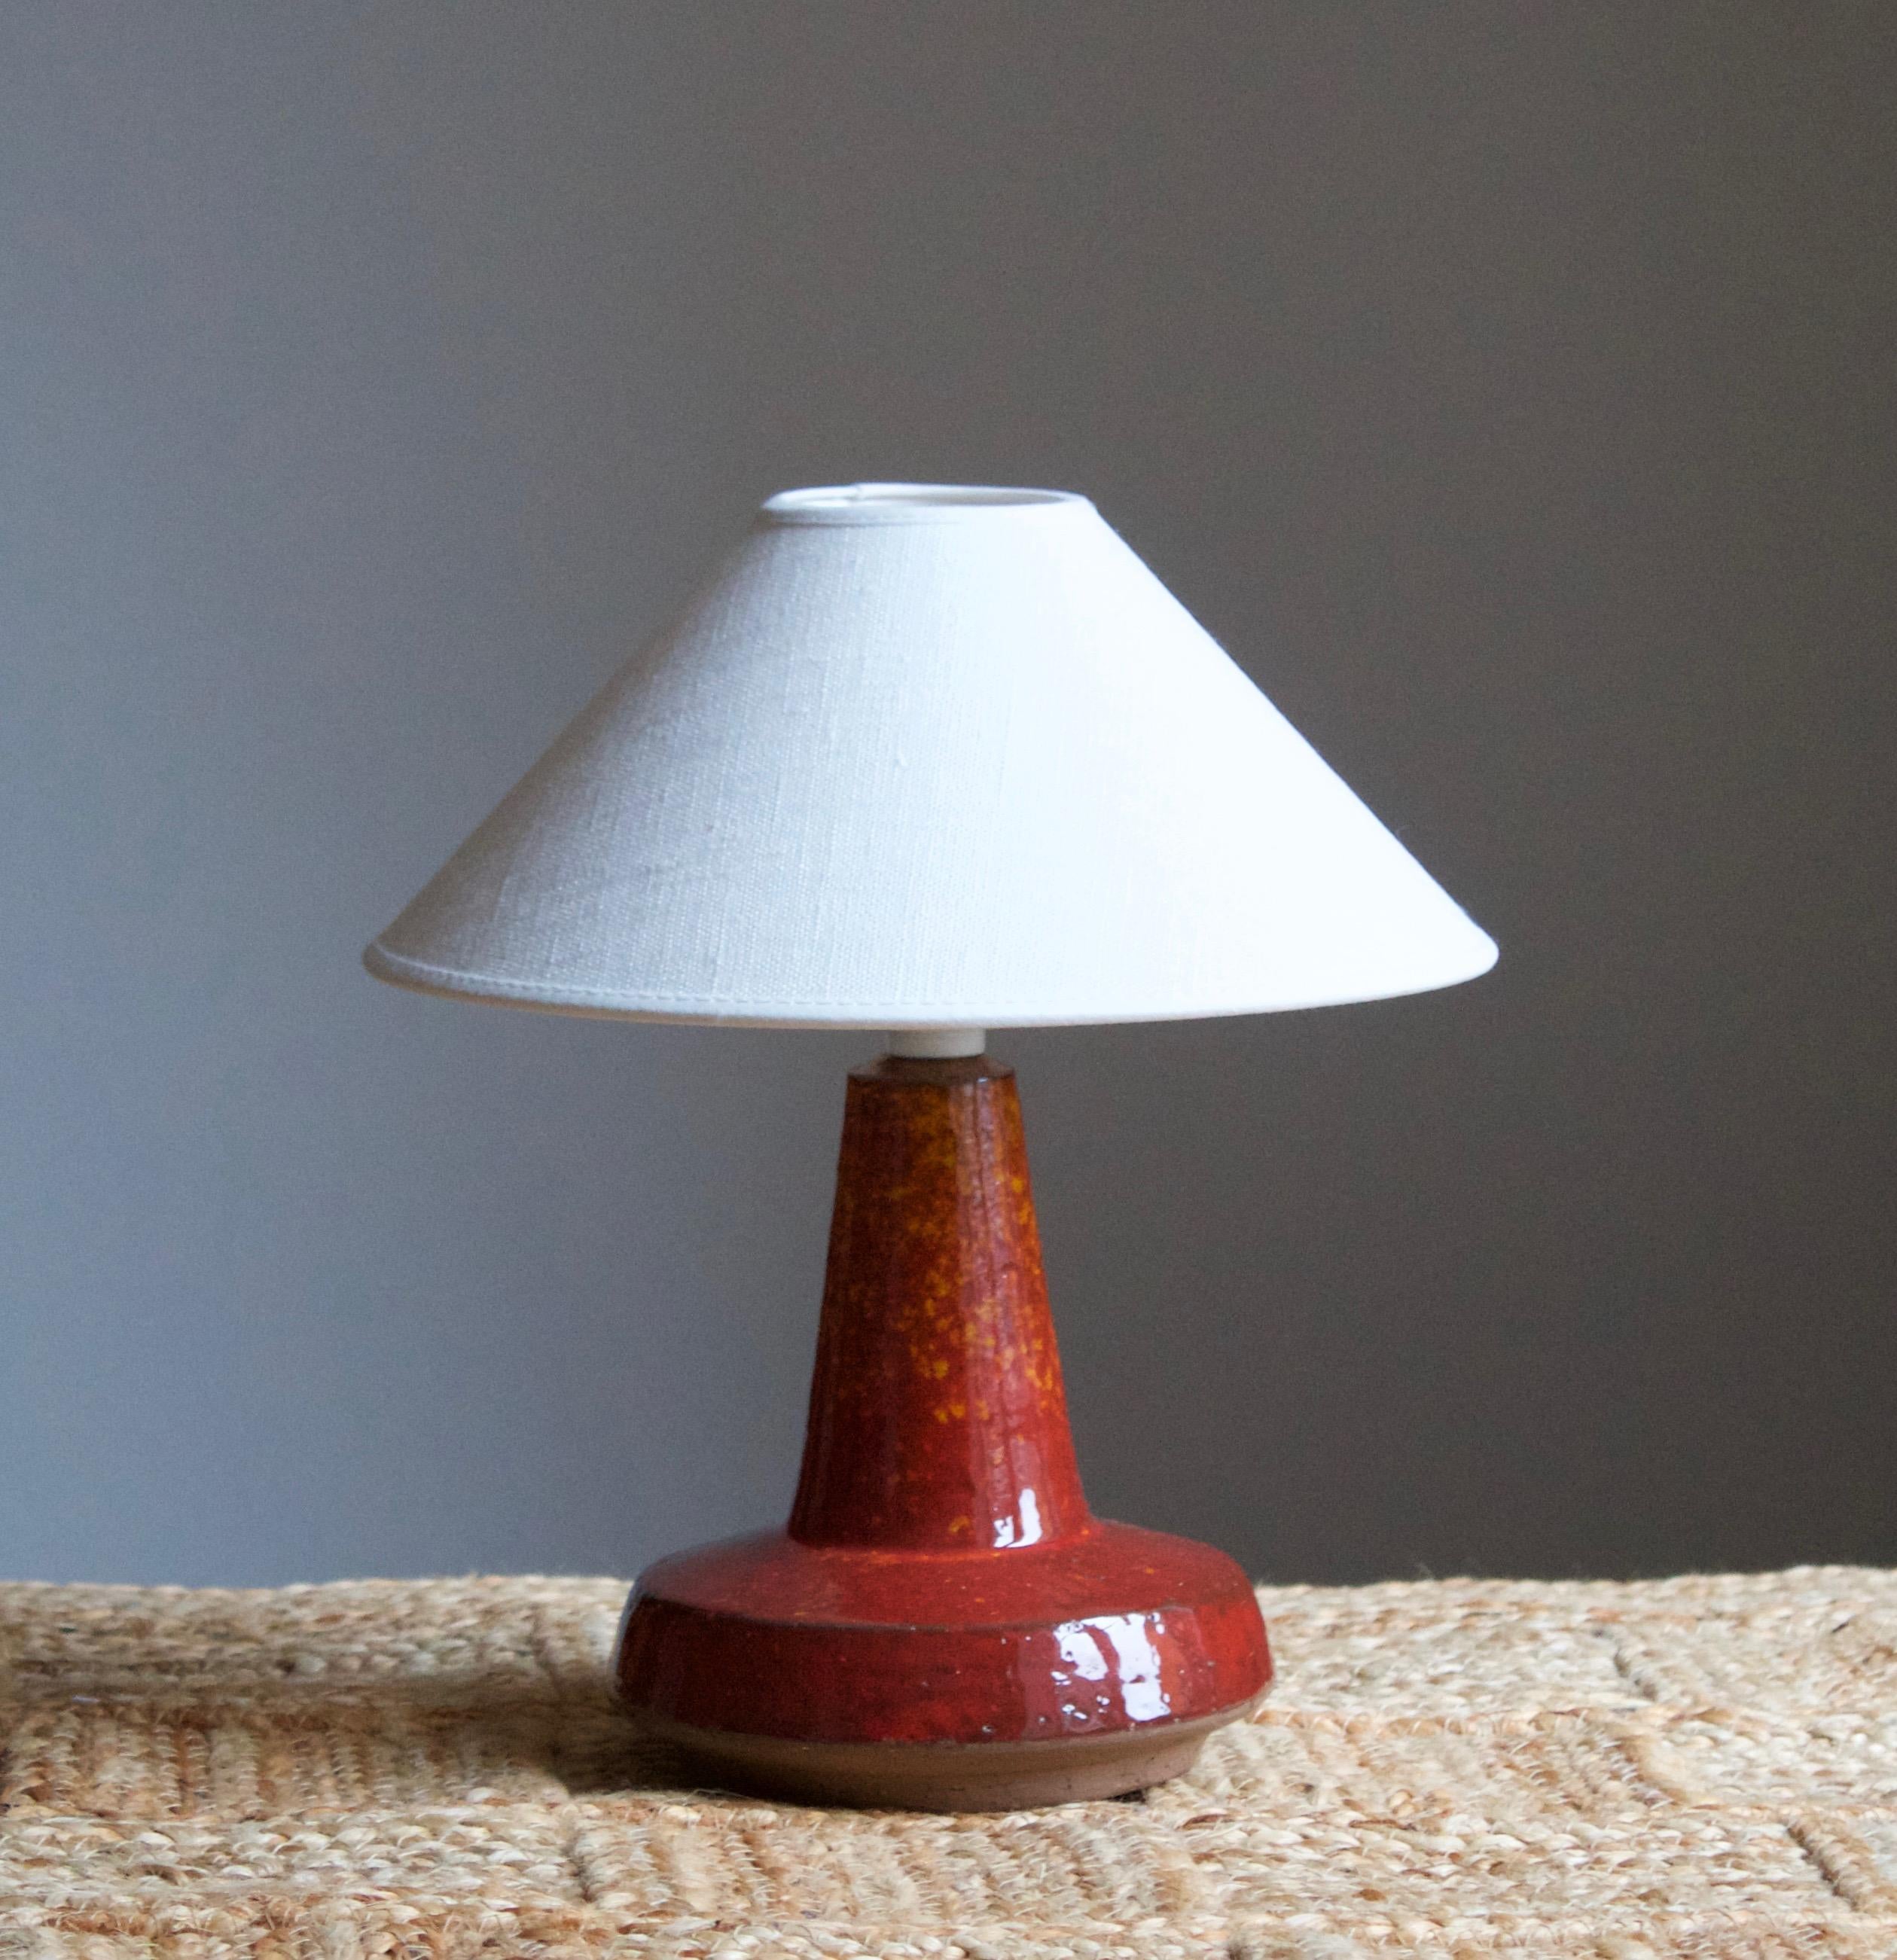 A table lamp produced by Michael Andersen Keramik. In stoneware. Marked.

Stated dimensions exclude lampshade. Height includes socket. Sold without lampshade.

Other ceramicists of the period include Axel Salto, Arne Bang, Carl-Harry Stålhane,